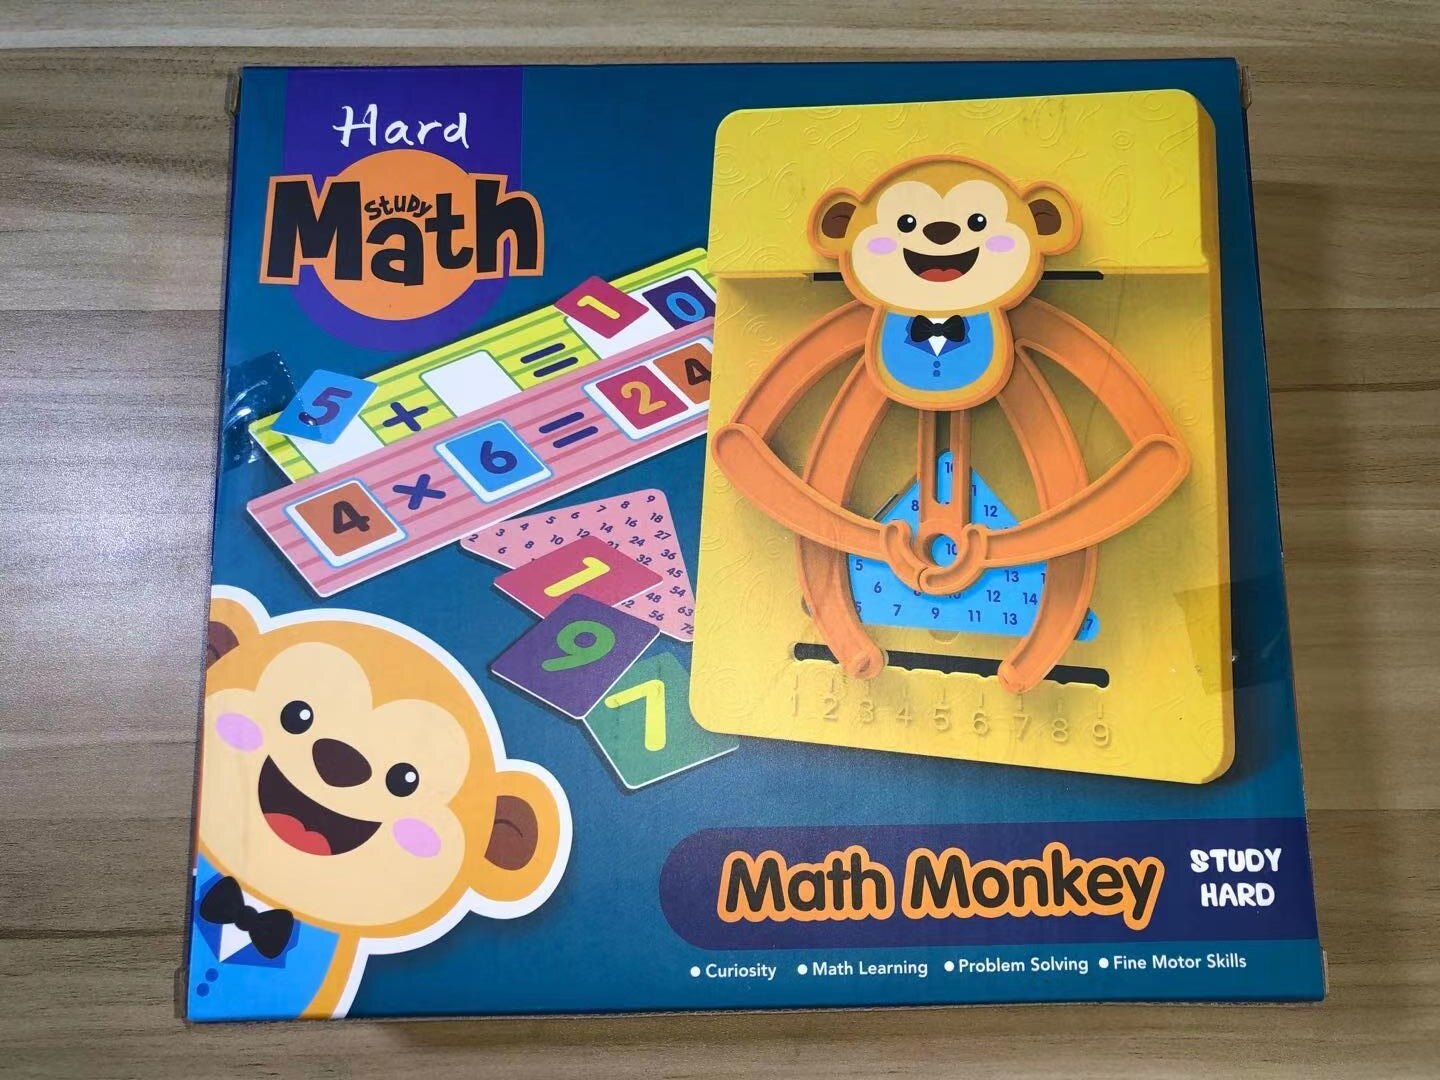 Funny Monkey Math Calculator for Girls & Boys, Educational Children's & Kids Learning Ages 3+